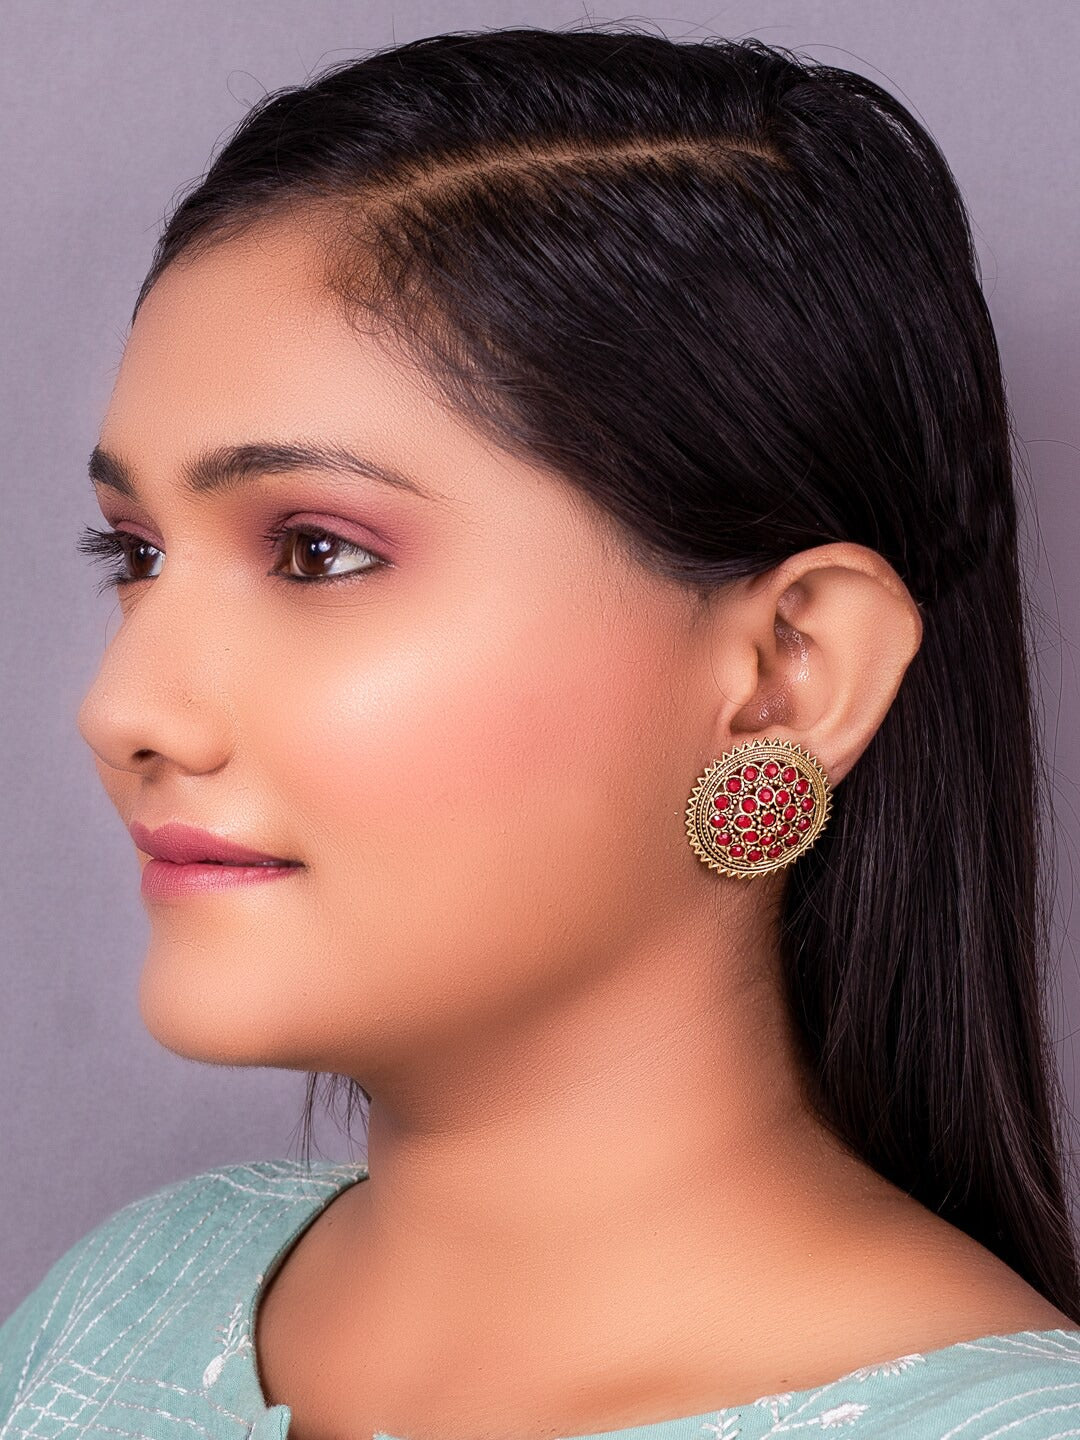 Women's Red Gold Plated Circular Artificial Beaded Handcrafted Studs Earrings - Morkanth